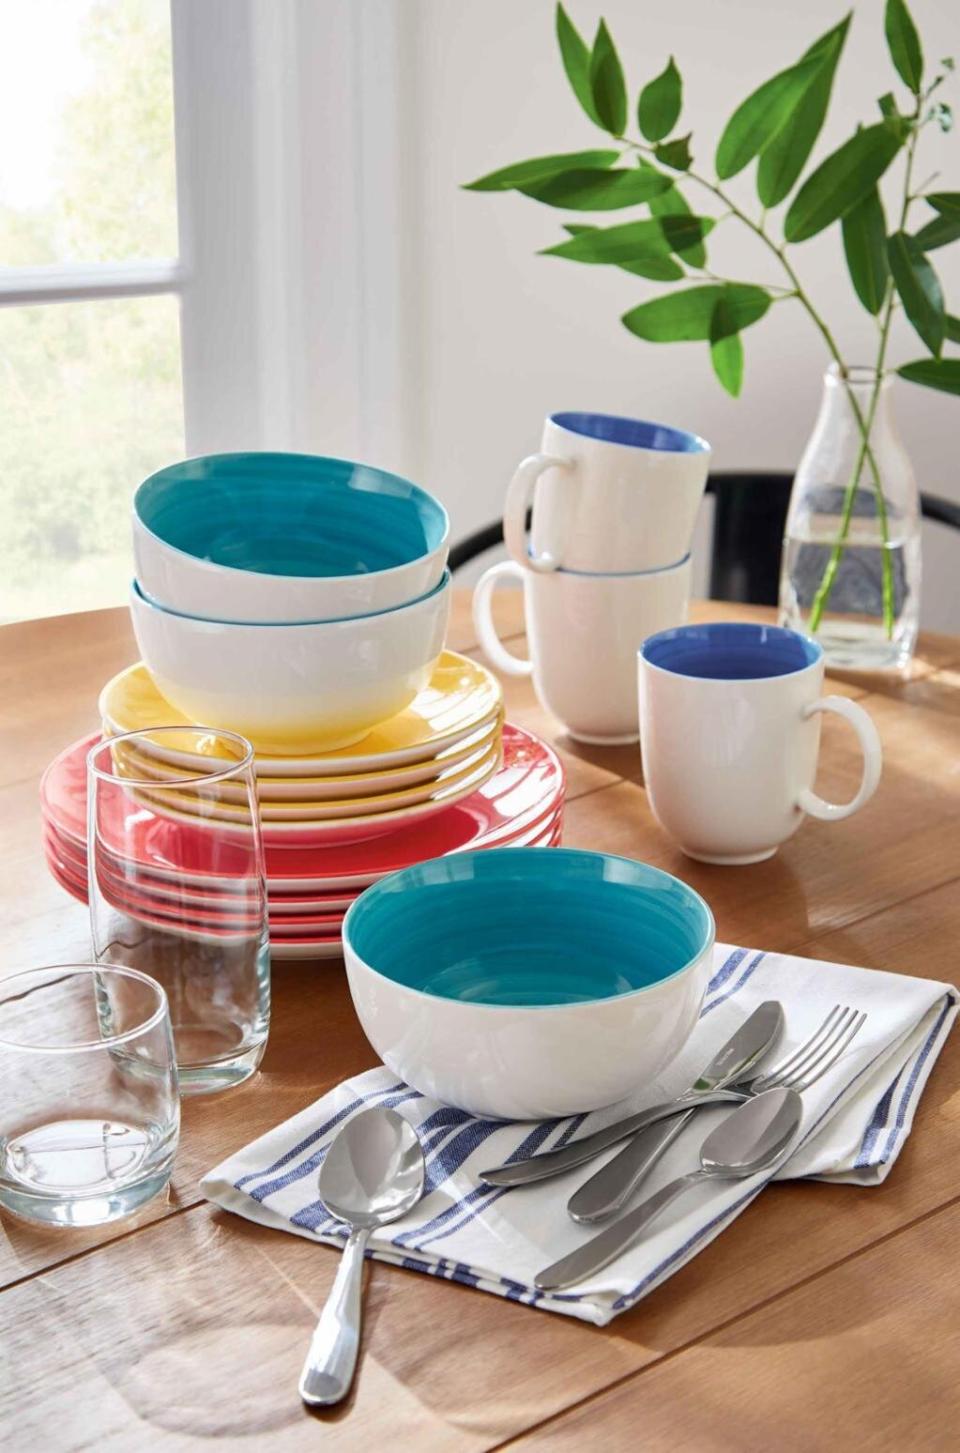 If you're cooking your own meals more instead of ordering takeout lately, you might want <a href="https://www.huffpost.com/entry/vintage-inspired-glassware-stemware-drinkware_l_5f6a4bd1c5b6189caef8f134" target="_blank" rel="noopener noreferrer">matching glassware</a> and dinnerware to make dinner more special. <br /><br />Fortunately, you can now <a href="https://fave.co/34Ghysx" target="_blank" rel="noopener noreferrer">save on drinkware, tableware and flatware</a> at Home Depot right now. Find things such as this set of <a href="https://fave.co/2SDY81K" target="_blank" rel="noopener noreferrer">black melamine plates trimmed in gold</a> for fancy nights in and a <a href="https://fave.co/3d9QhlW" target="_blank" rel="noopener noreferrer">crystal pitcher</a> for chilled cider and lemonade. <br /><br />Check out all the glassware and dinnerware on sale at <a href="https://fave.co/2SD29U1" target="_blank" rel="noopener noreferrer">﻿The Home Depot</a>.